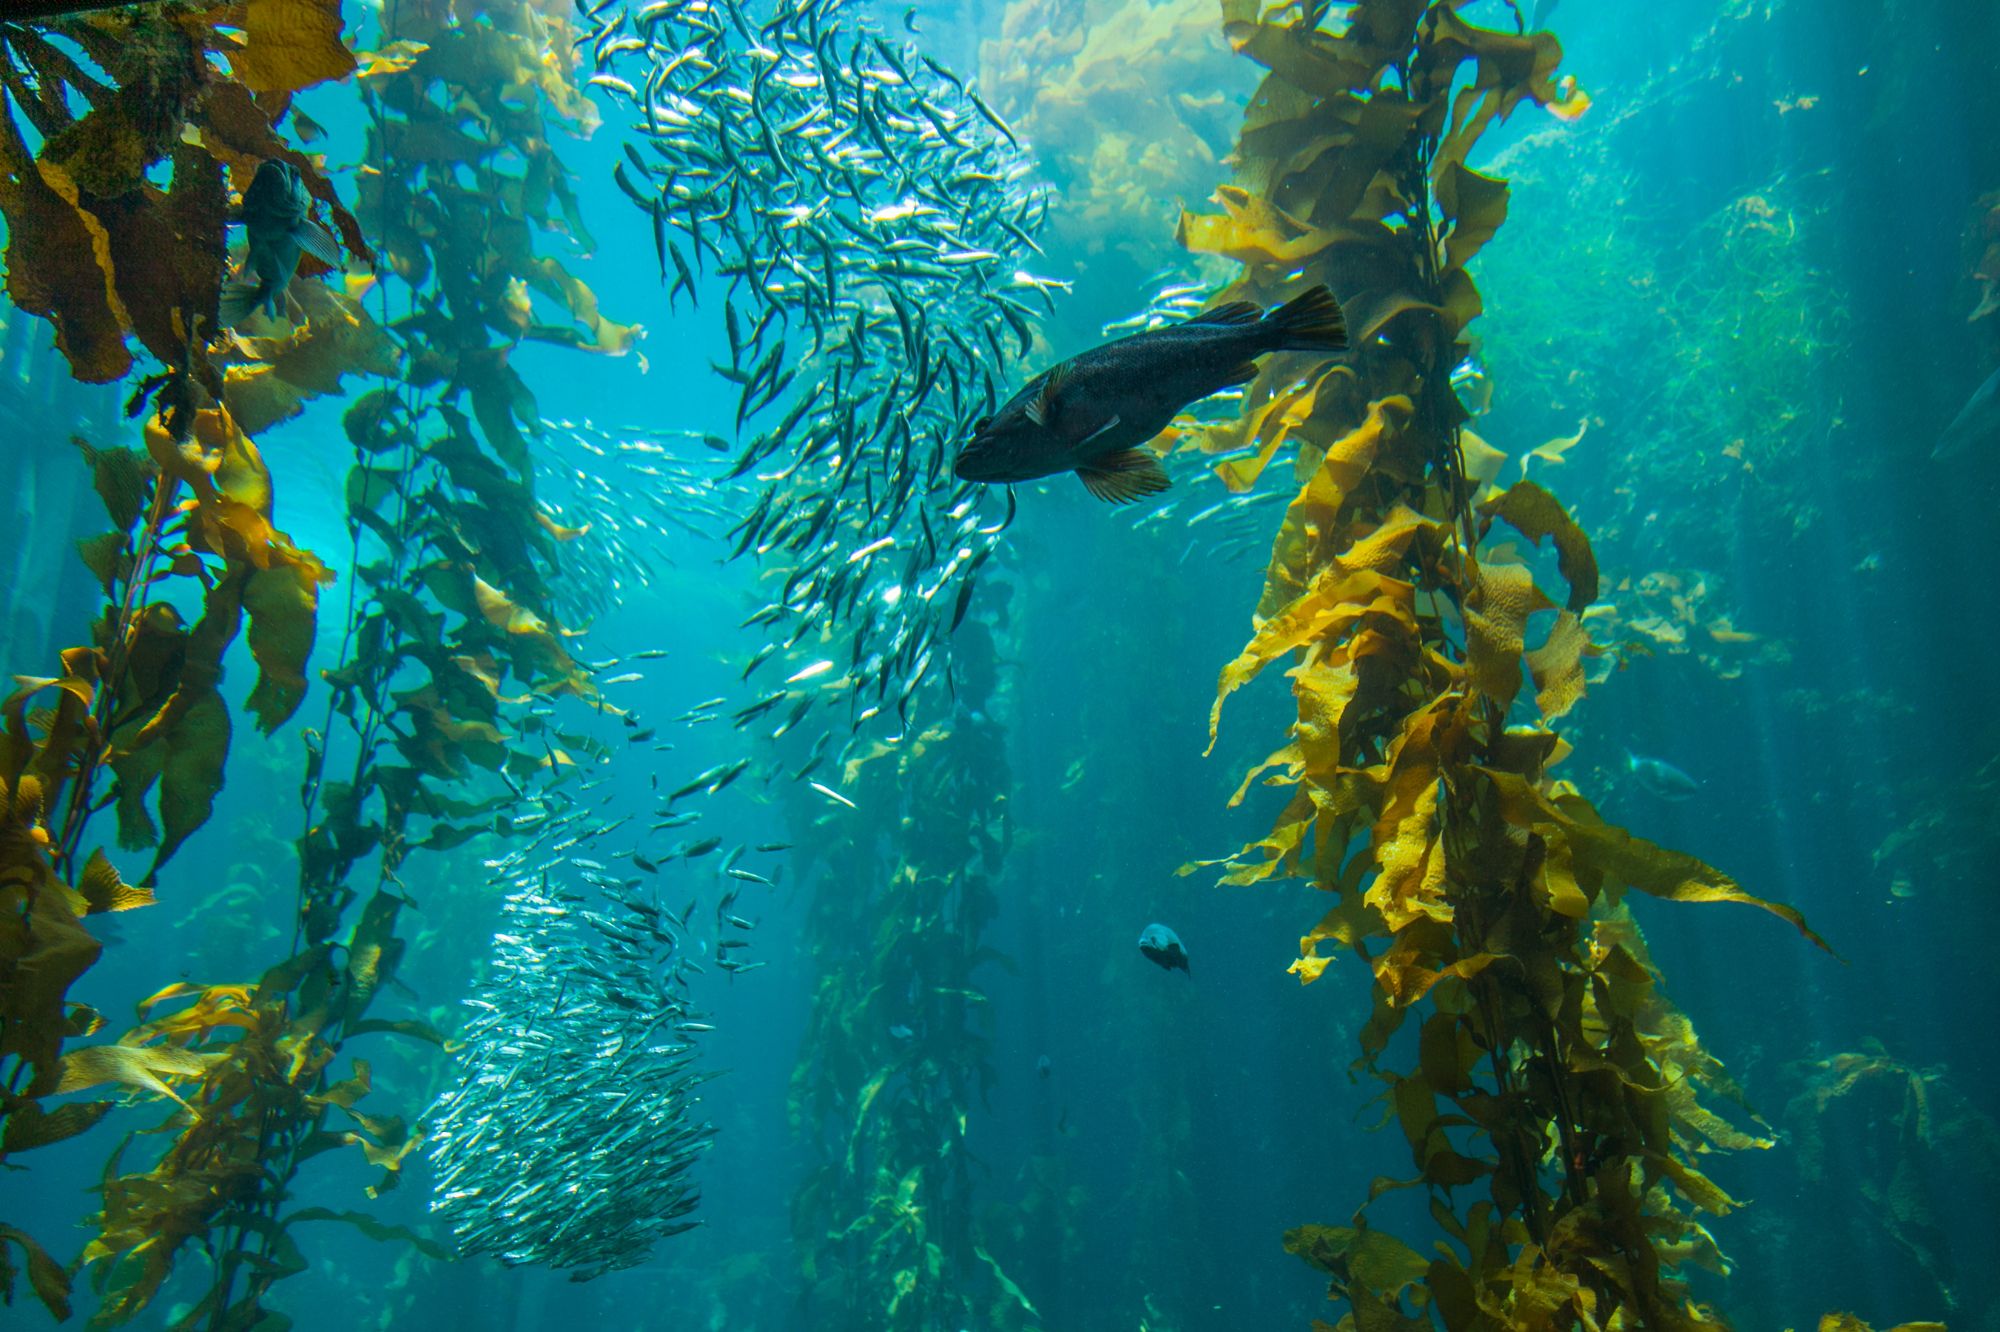 Seaweed kelp has a high rate of carbon capture